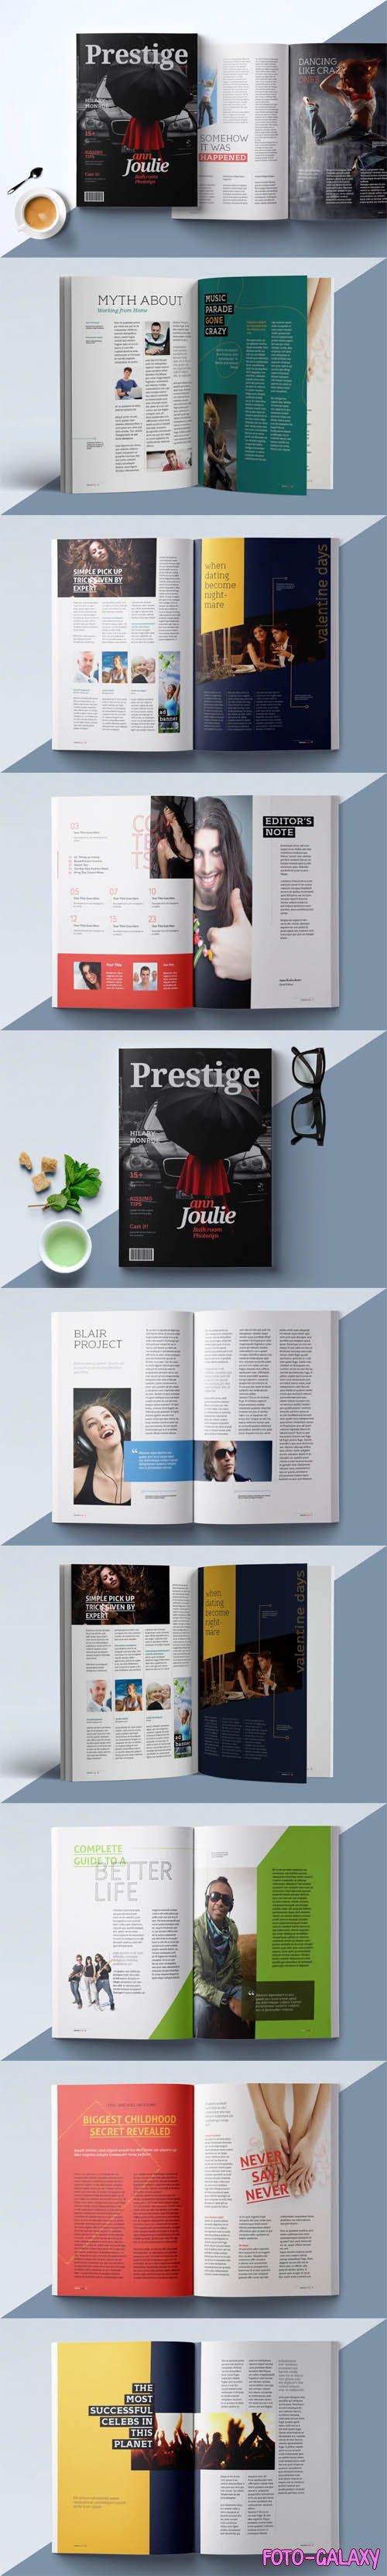 Magazine InDesign Template [24 Pages]